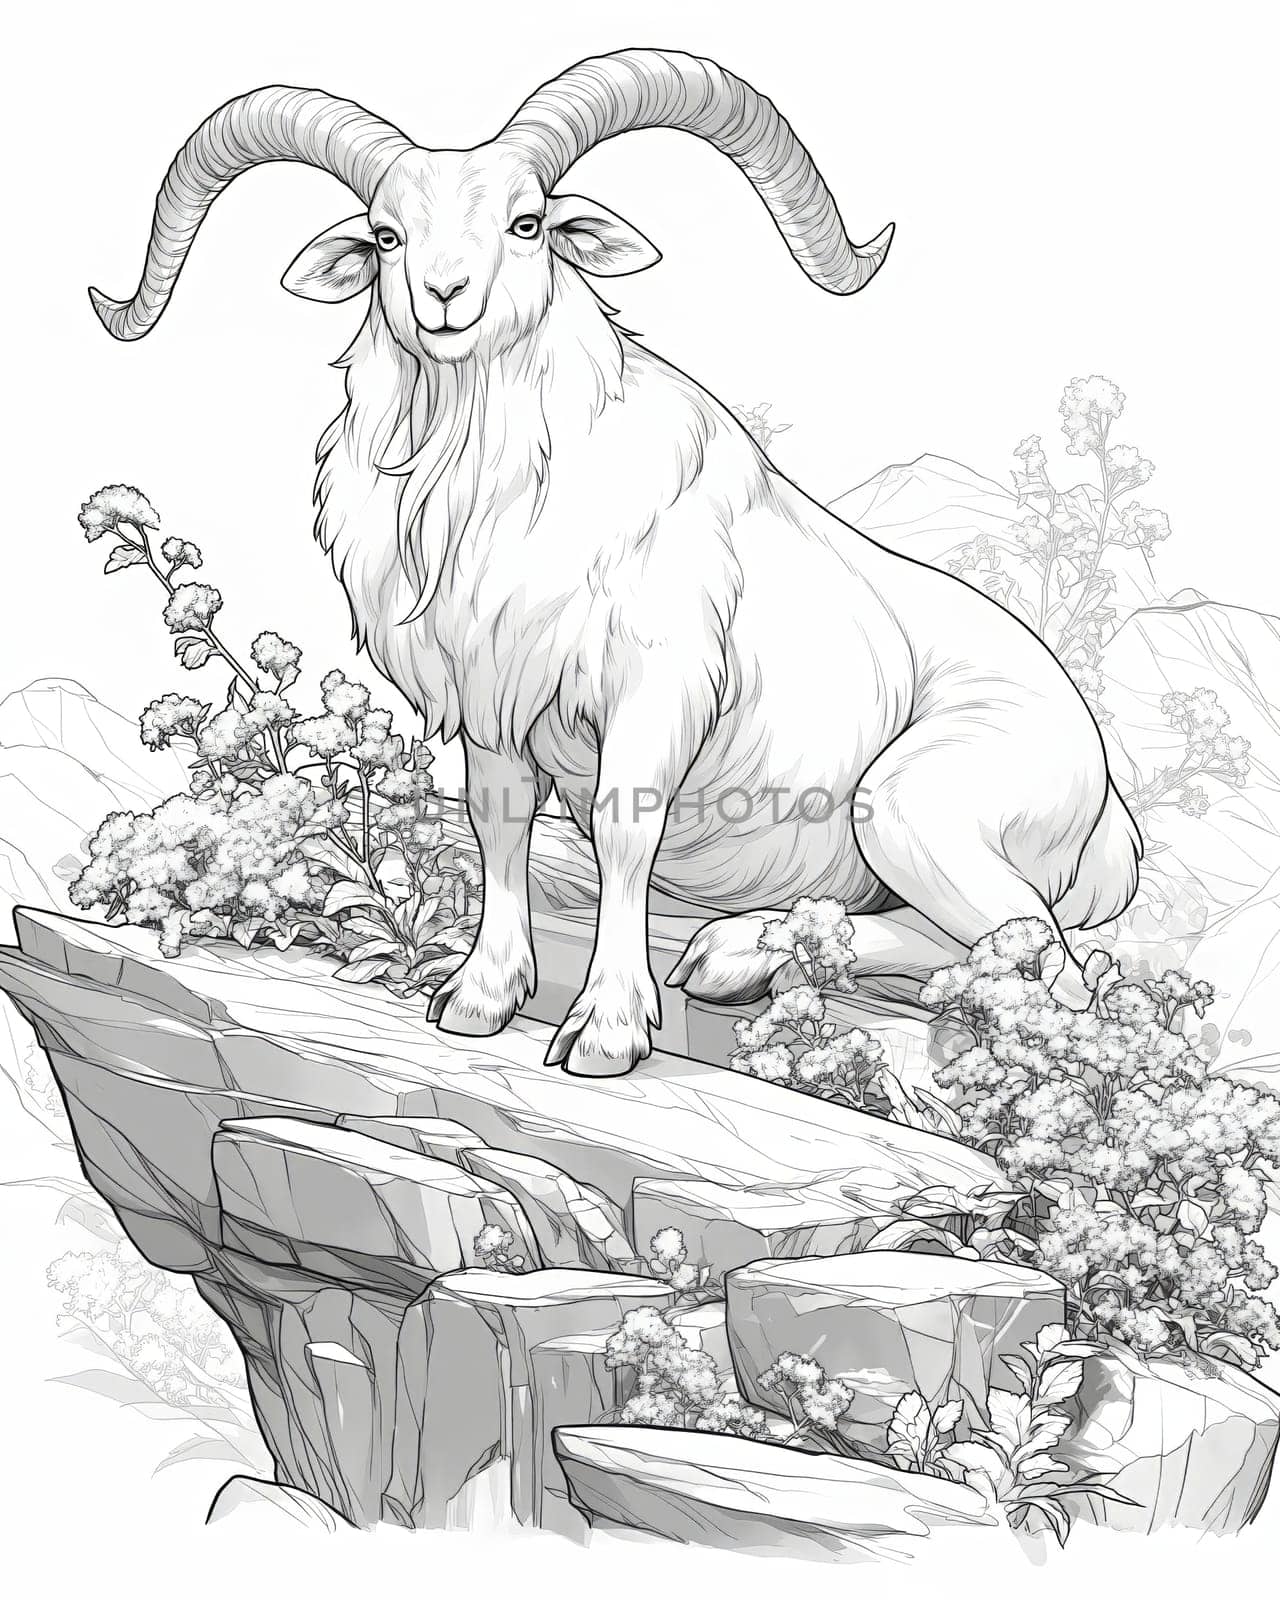 Coloring book for children, coloring animal, goat. by Fischeron